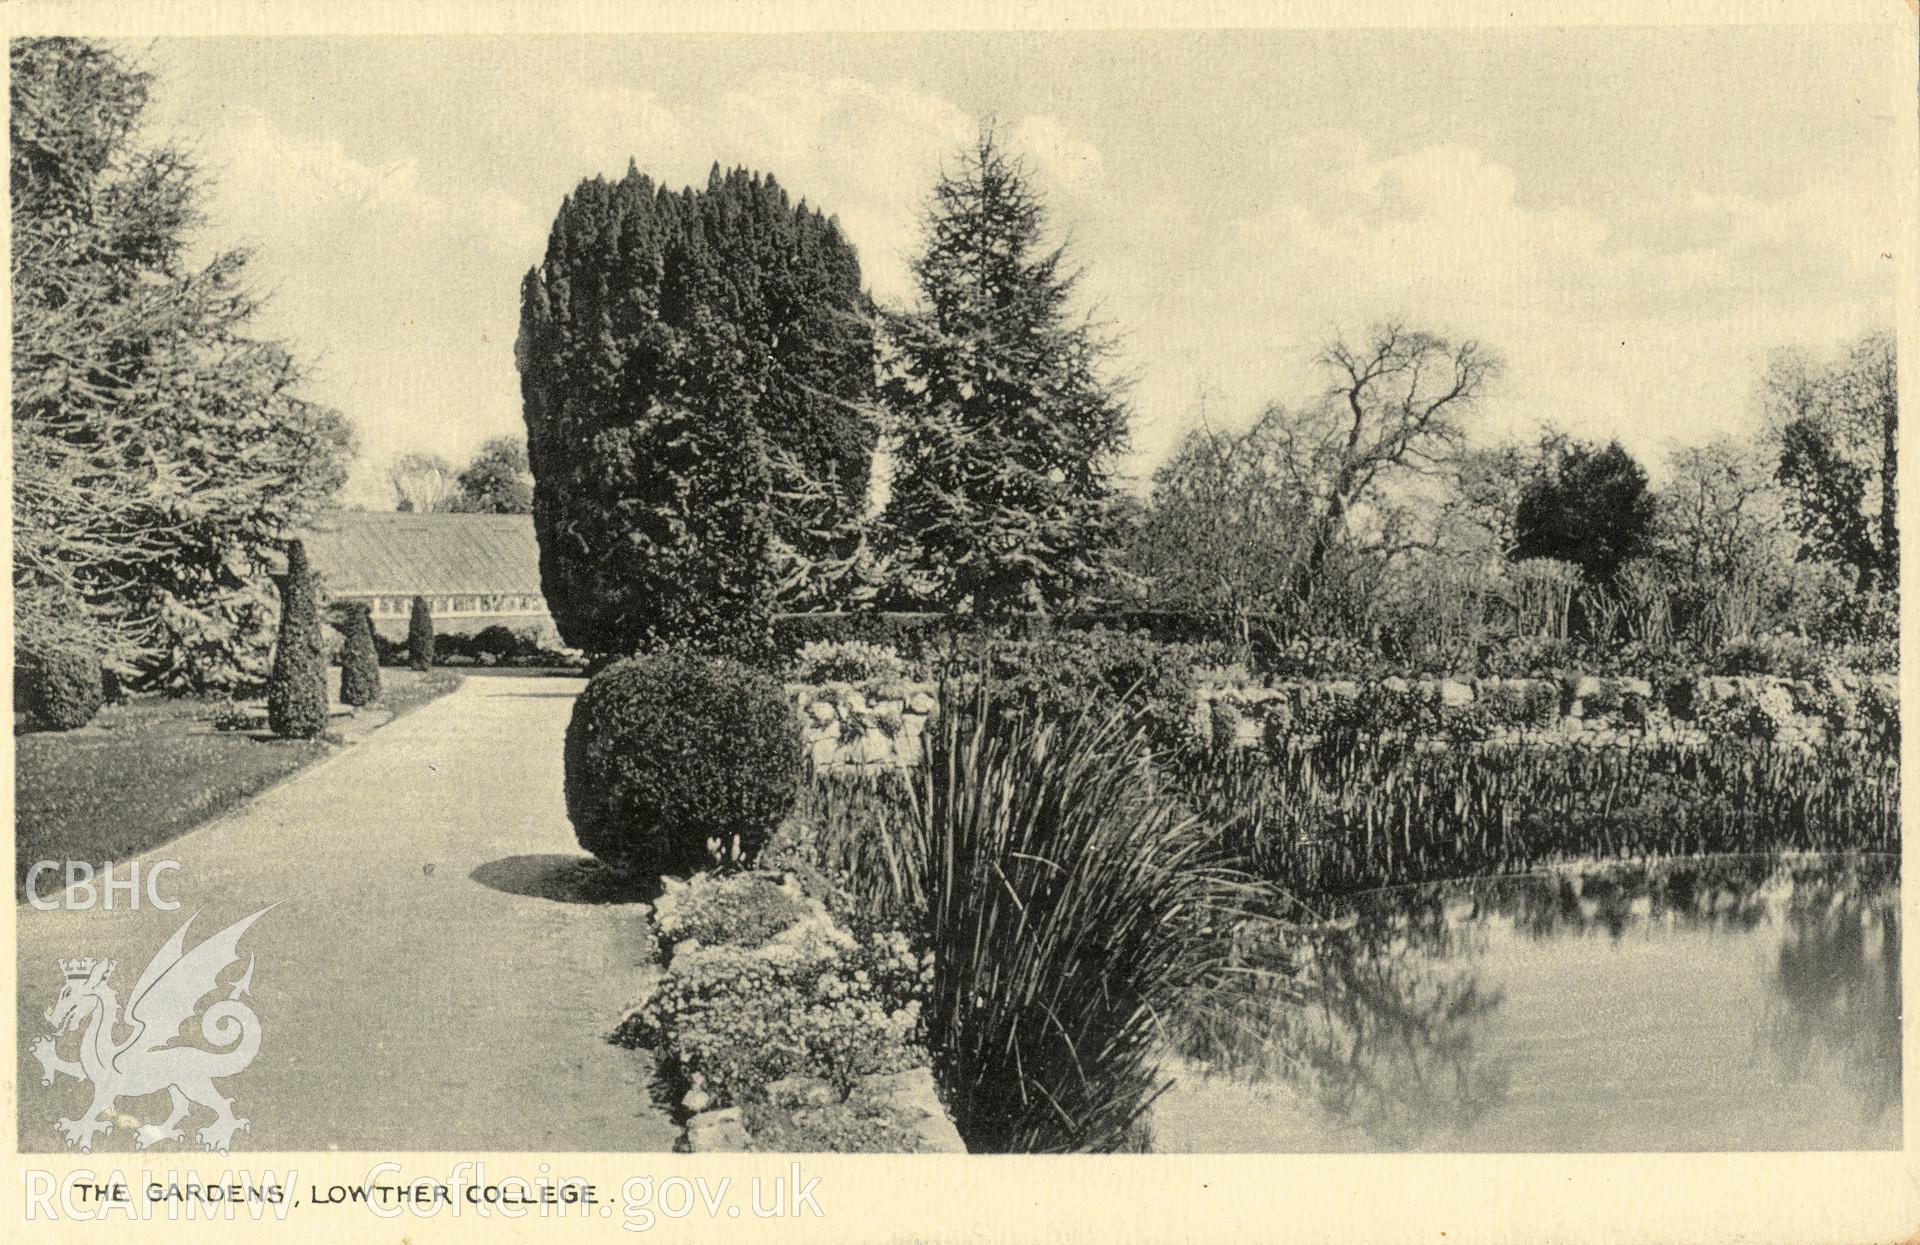 Digitised postcard image of Bodelwyddan Castle / Lowther College Garden. Produced by Parks and Gardens Data Services, from an original item in the Peter Davis Collection at Parks and Gardens UK. We hold only web-resolution images of this collection, suitable for viewing on screen and for research purposes only. We do not hold the original images, or publication quality scans.